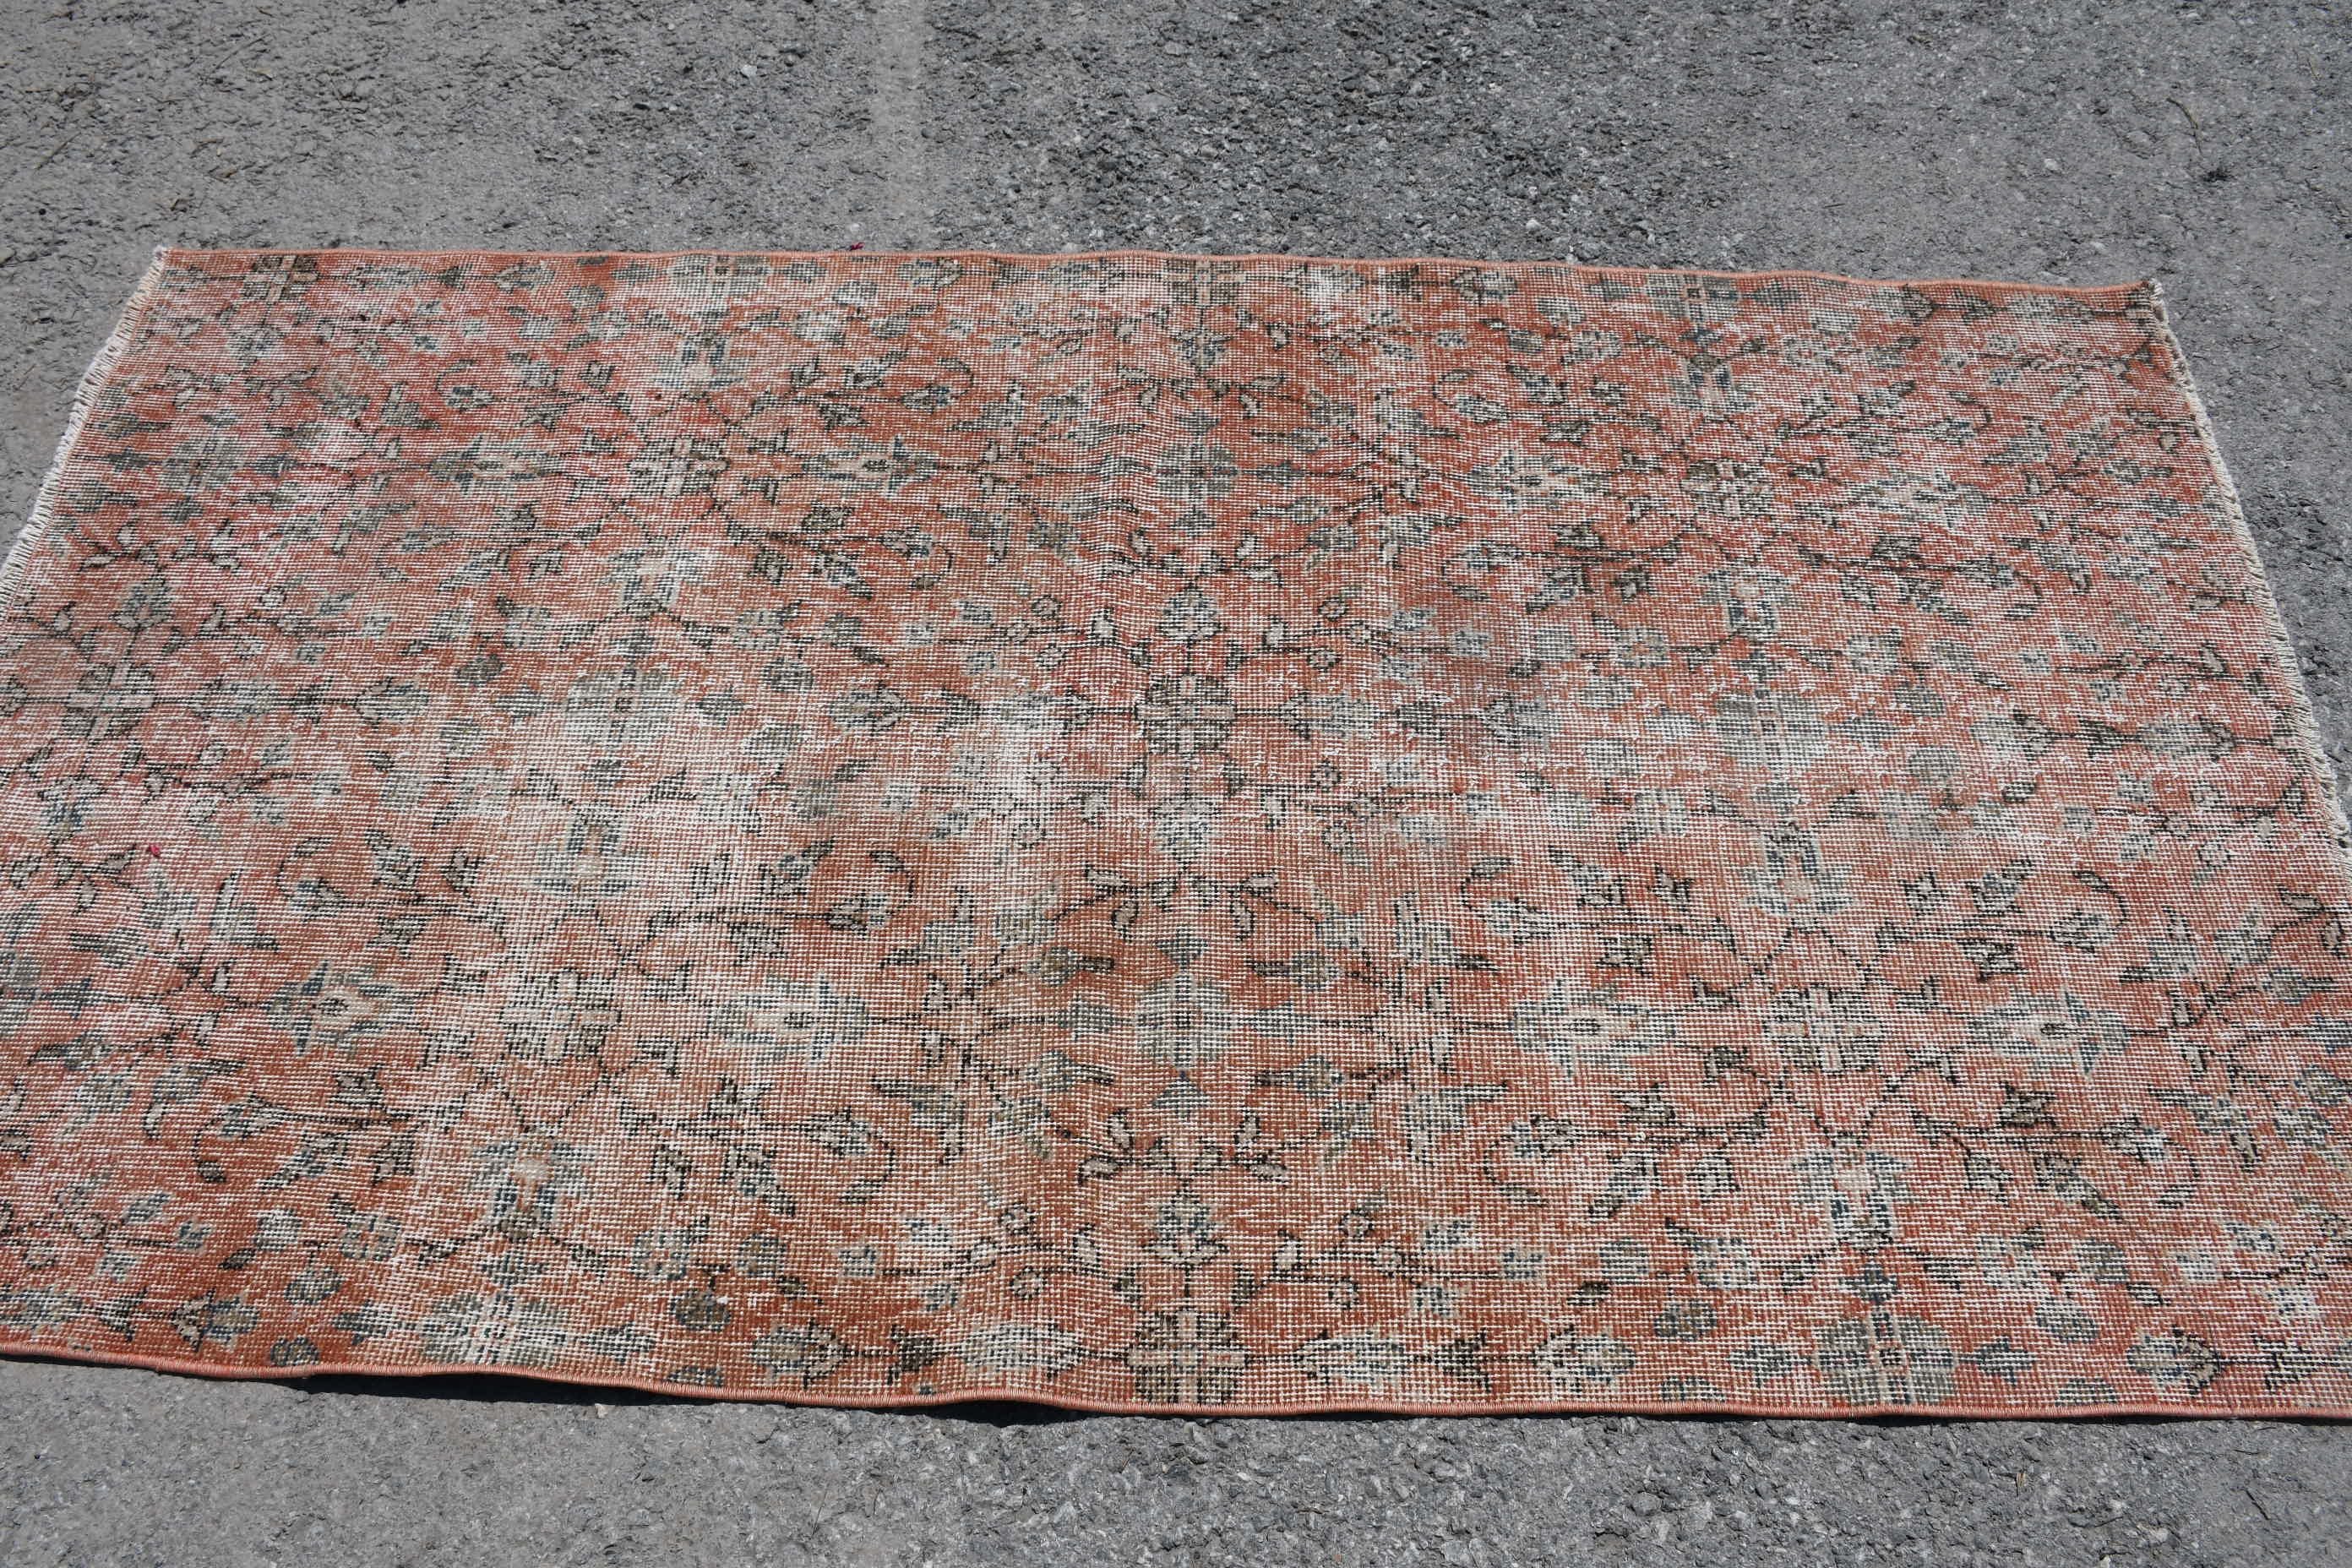 Vintage Rugs, Turkish Rug, 3.5x6.3 ft Accent Rug, Rugs for Kitchen, Entry Rugs, Wool Rugs, Kitchen Rugs, Moroccan Rugs, Orange Wool Rug